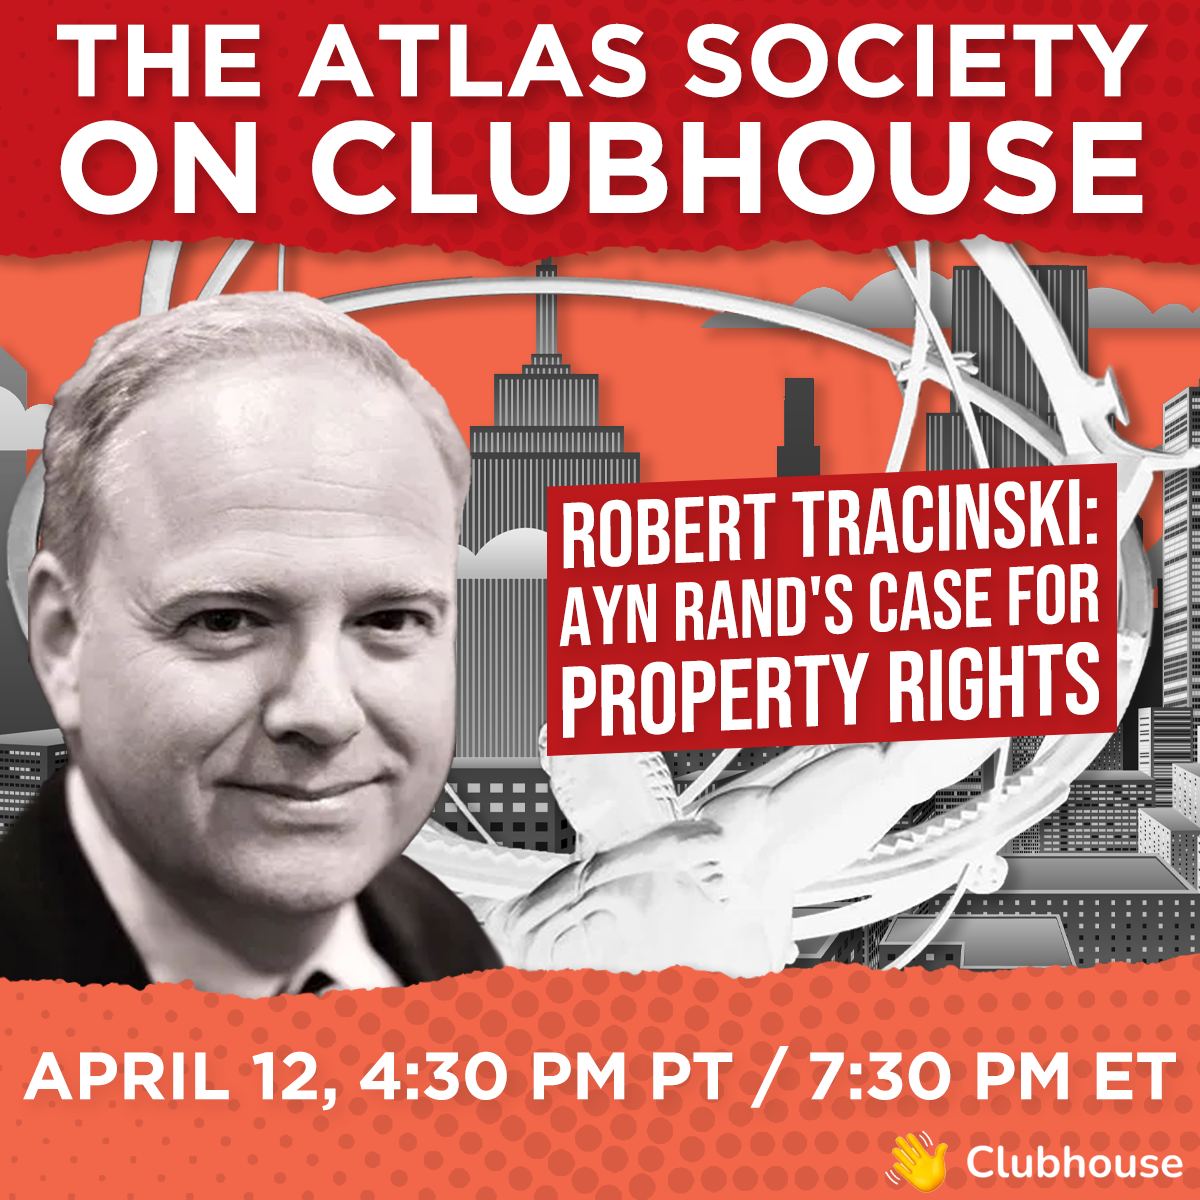 Robert Tracinski - Ayn Rand's Case for Property Rights